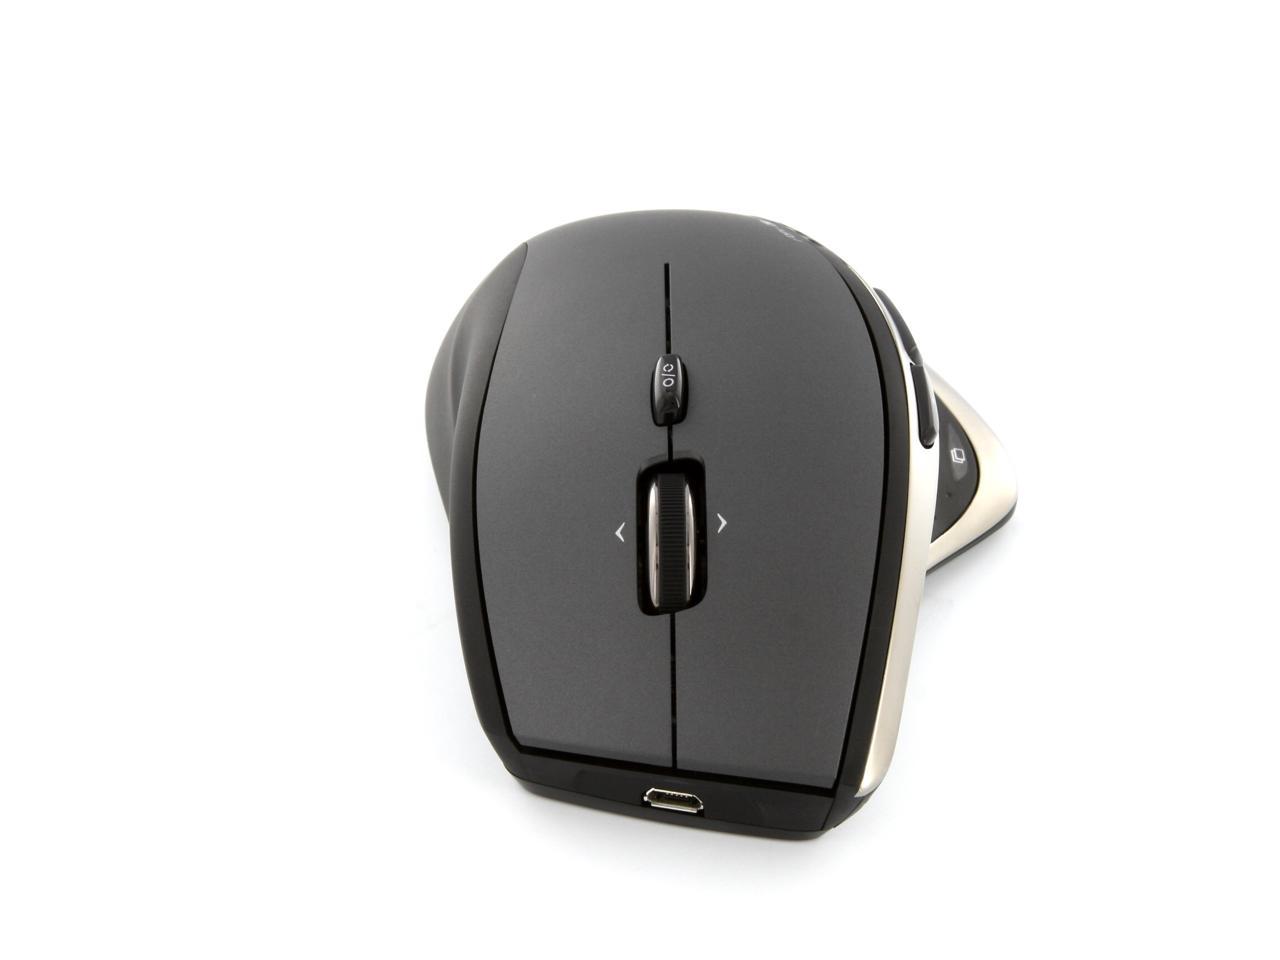 forgetting logitech mouse mac